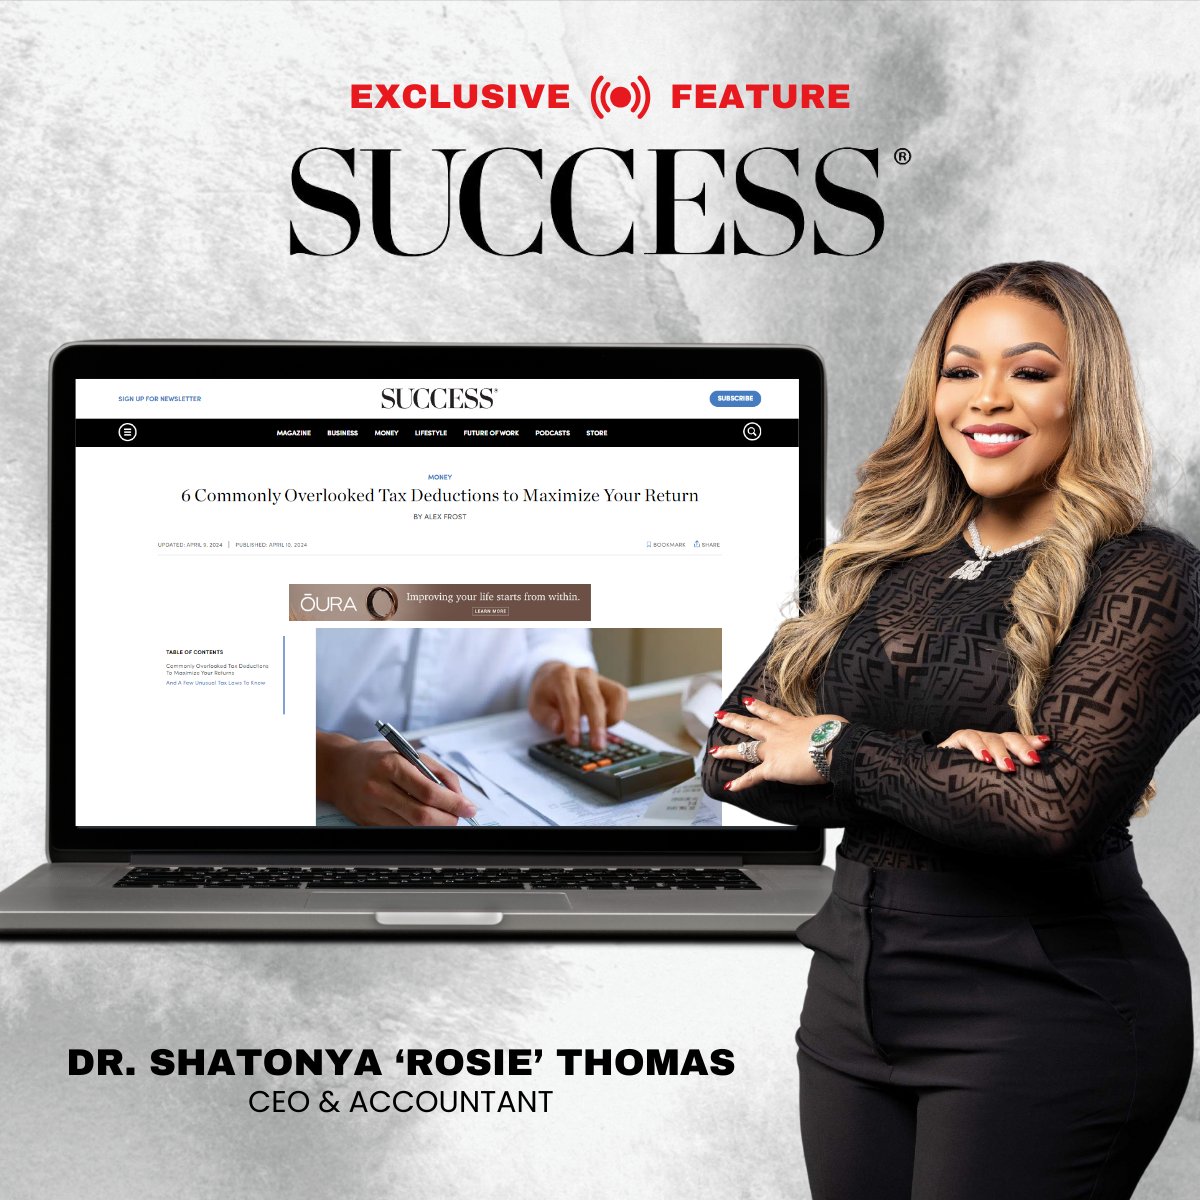 Get insights from our Tax Pro, Dr. Rosie Thomas, about 6 Commonly Overlooked Tax Deductions to Maximize Your Return that has been featured on @successmagazine

Read the full article here bit.ly/SuccessArticle…

#Taxpreparer #Taxsoftware #Taxbusiness  #ThomasFinancial #TaxTok